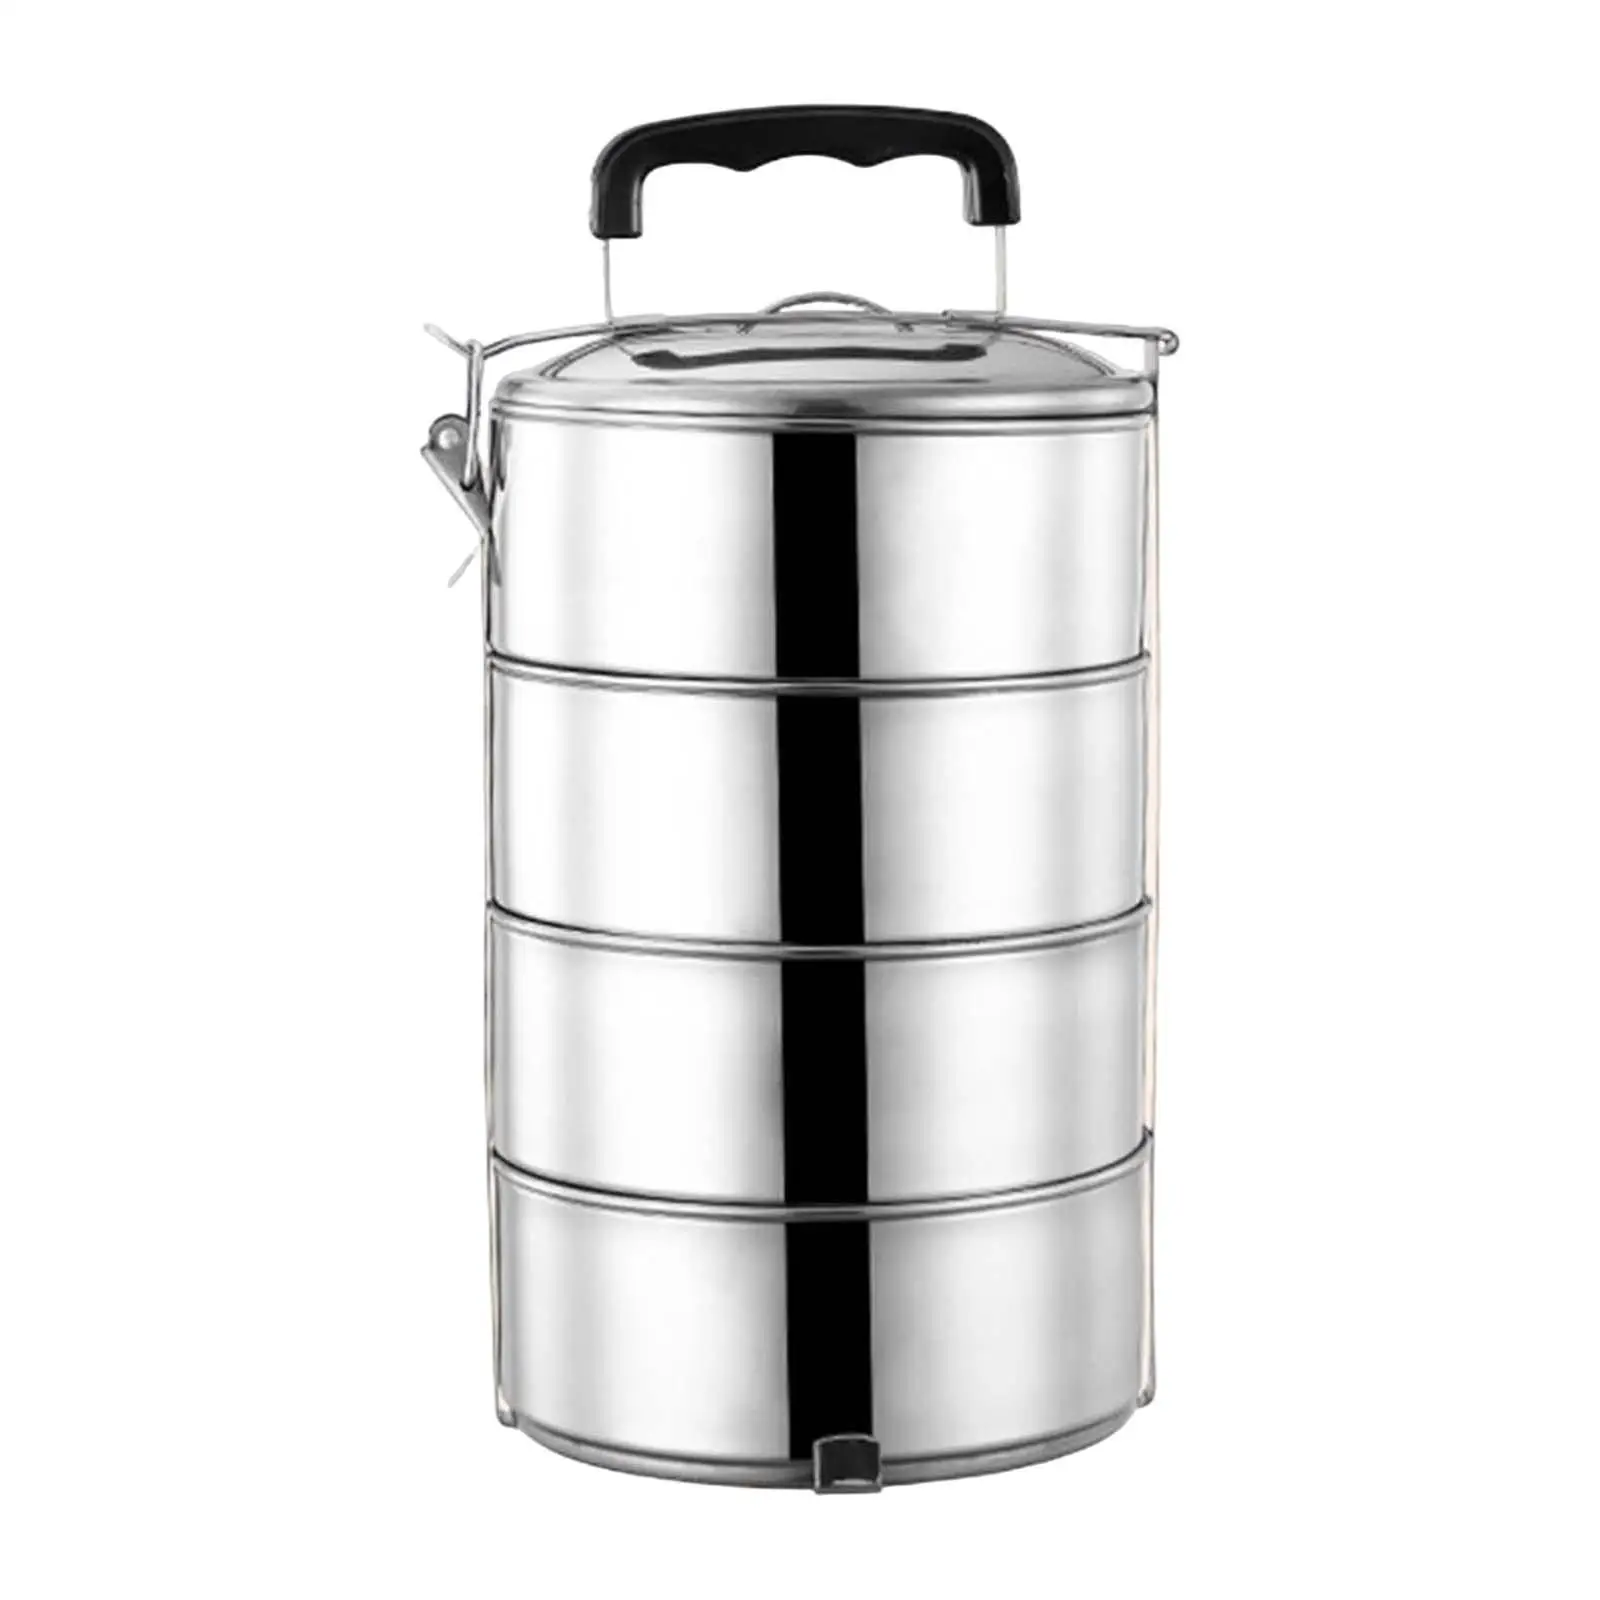 Adult Lunch Box Stackable Lunch Box with Handle, Microwave Stainless Steel Bento